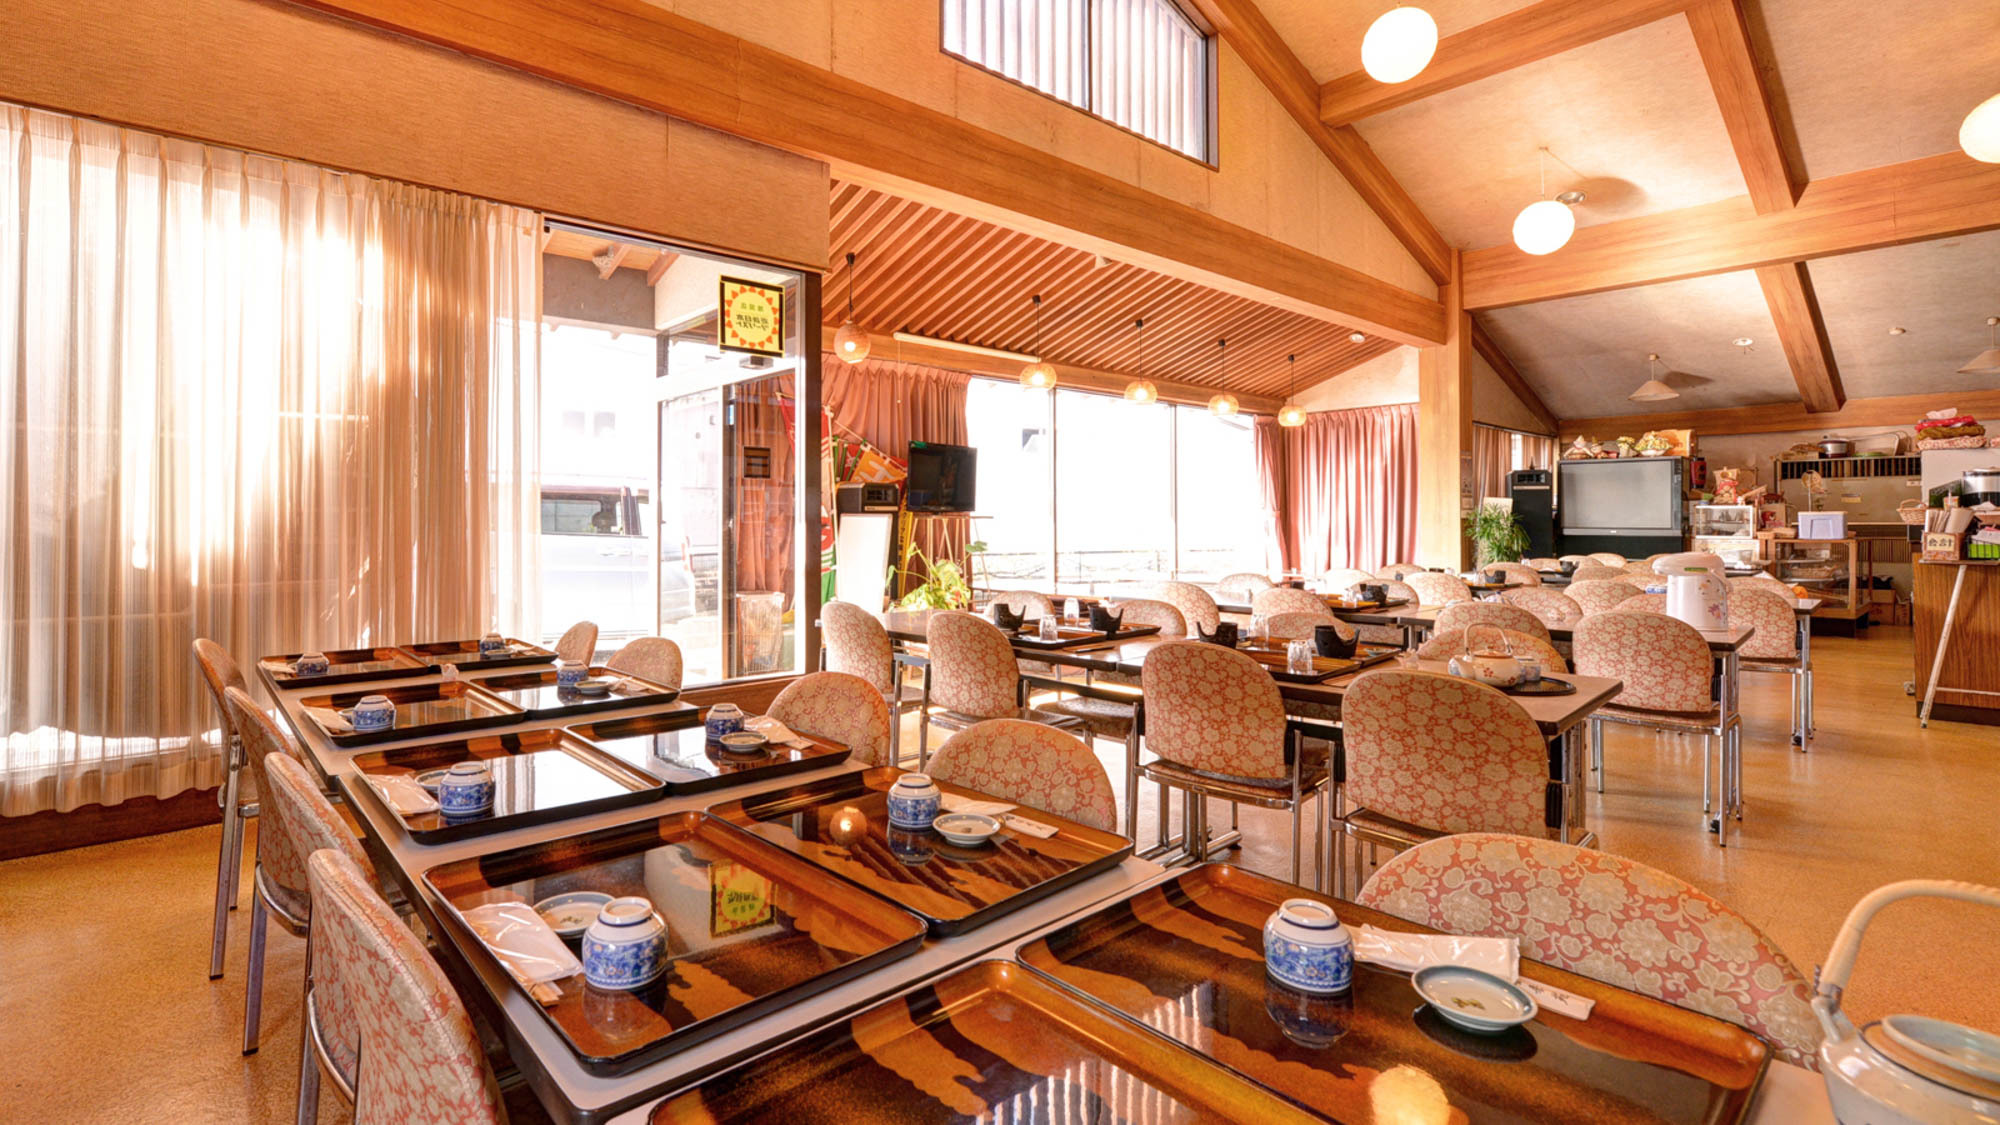 Saginoyu Onsen Yasugien Saginoyu Onsen Yasugien is conveniently located in the popular Yasugi area. Both business travelers and tourists can enjoy the propertys facilities and services. To be found at the property are facil